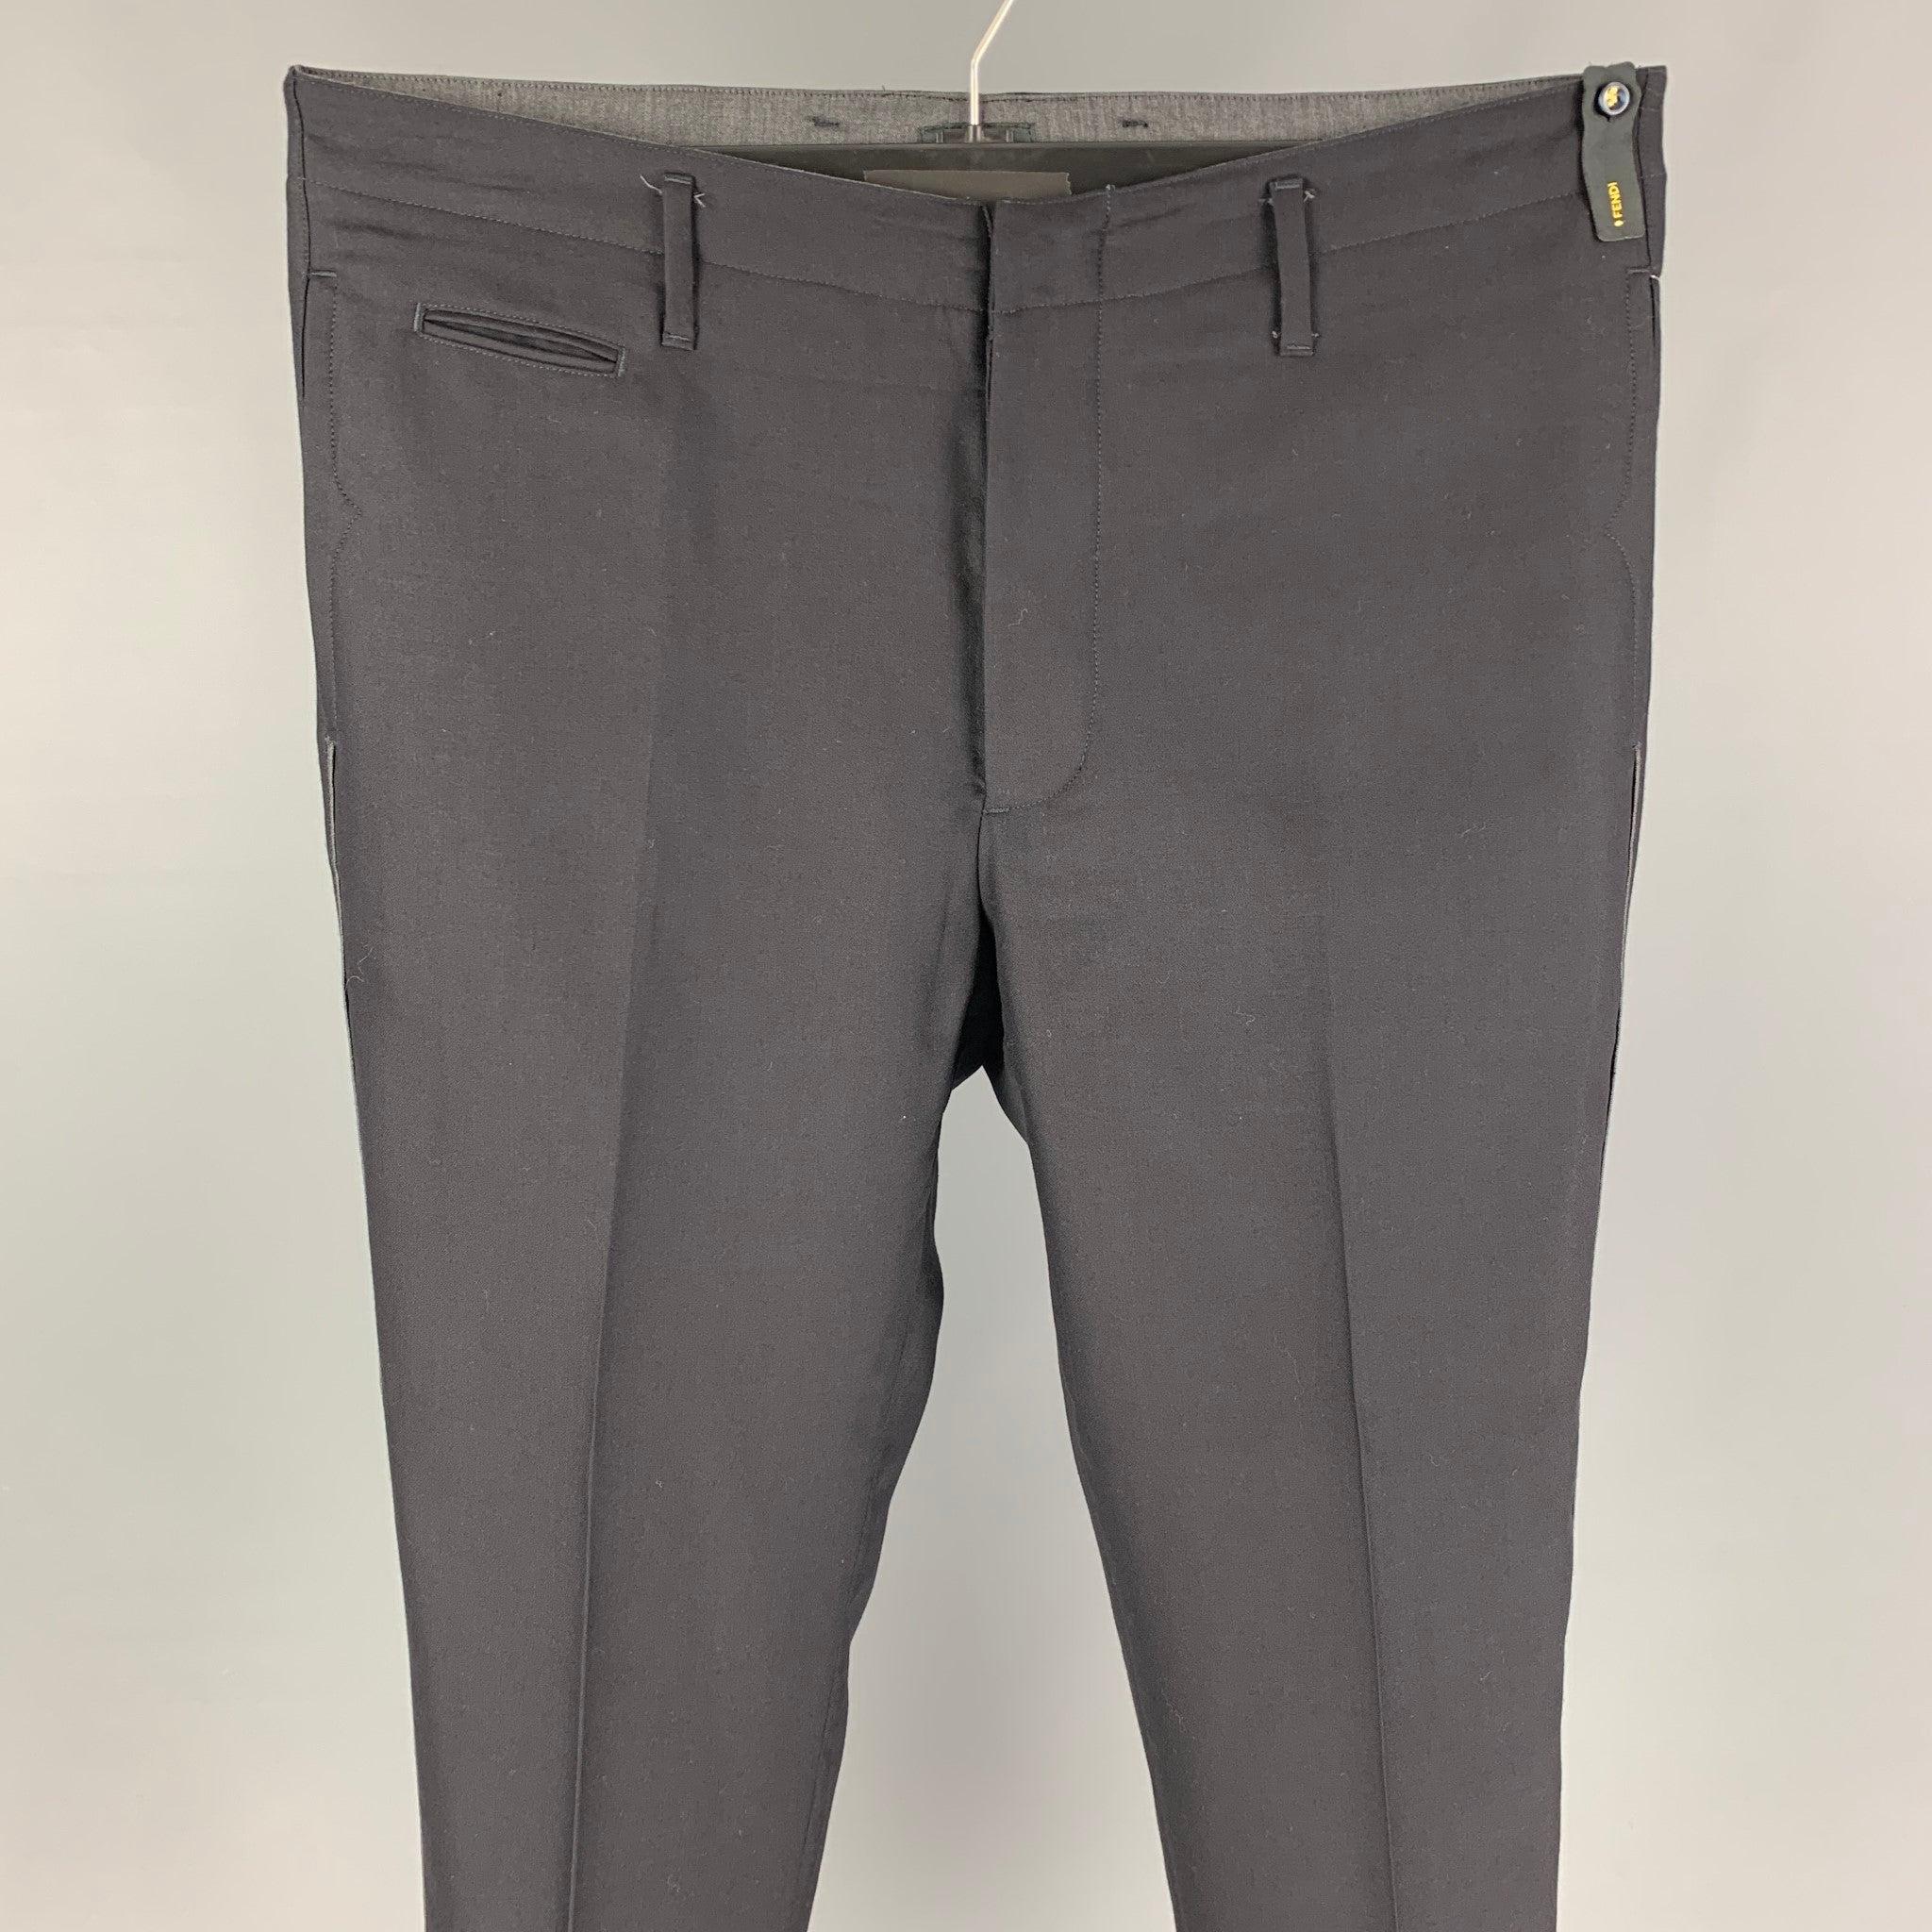 FENDI dress pants comes in a black virgin wool featuring a flat front, slim fit, side stripe detail, front tab, and a button fly closure. Made in Italy.
 Excellent
 Pre-Owned Condition. 
 

 Marked:  50 
 

 Measurements: 
  Waist: 34 inches Rise: